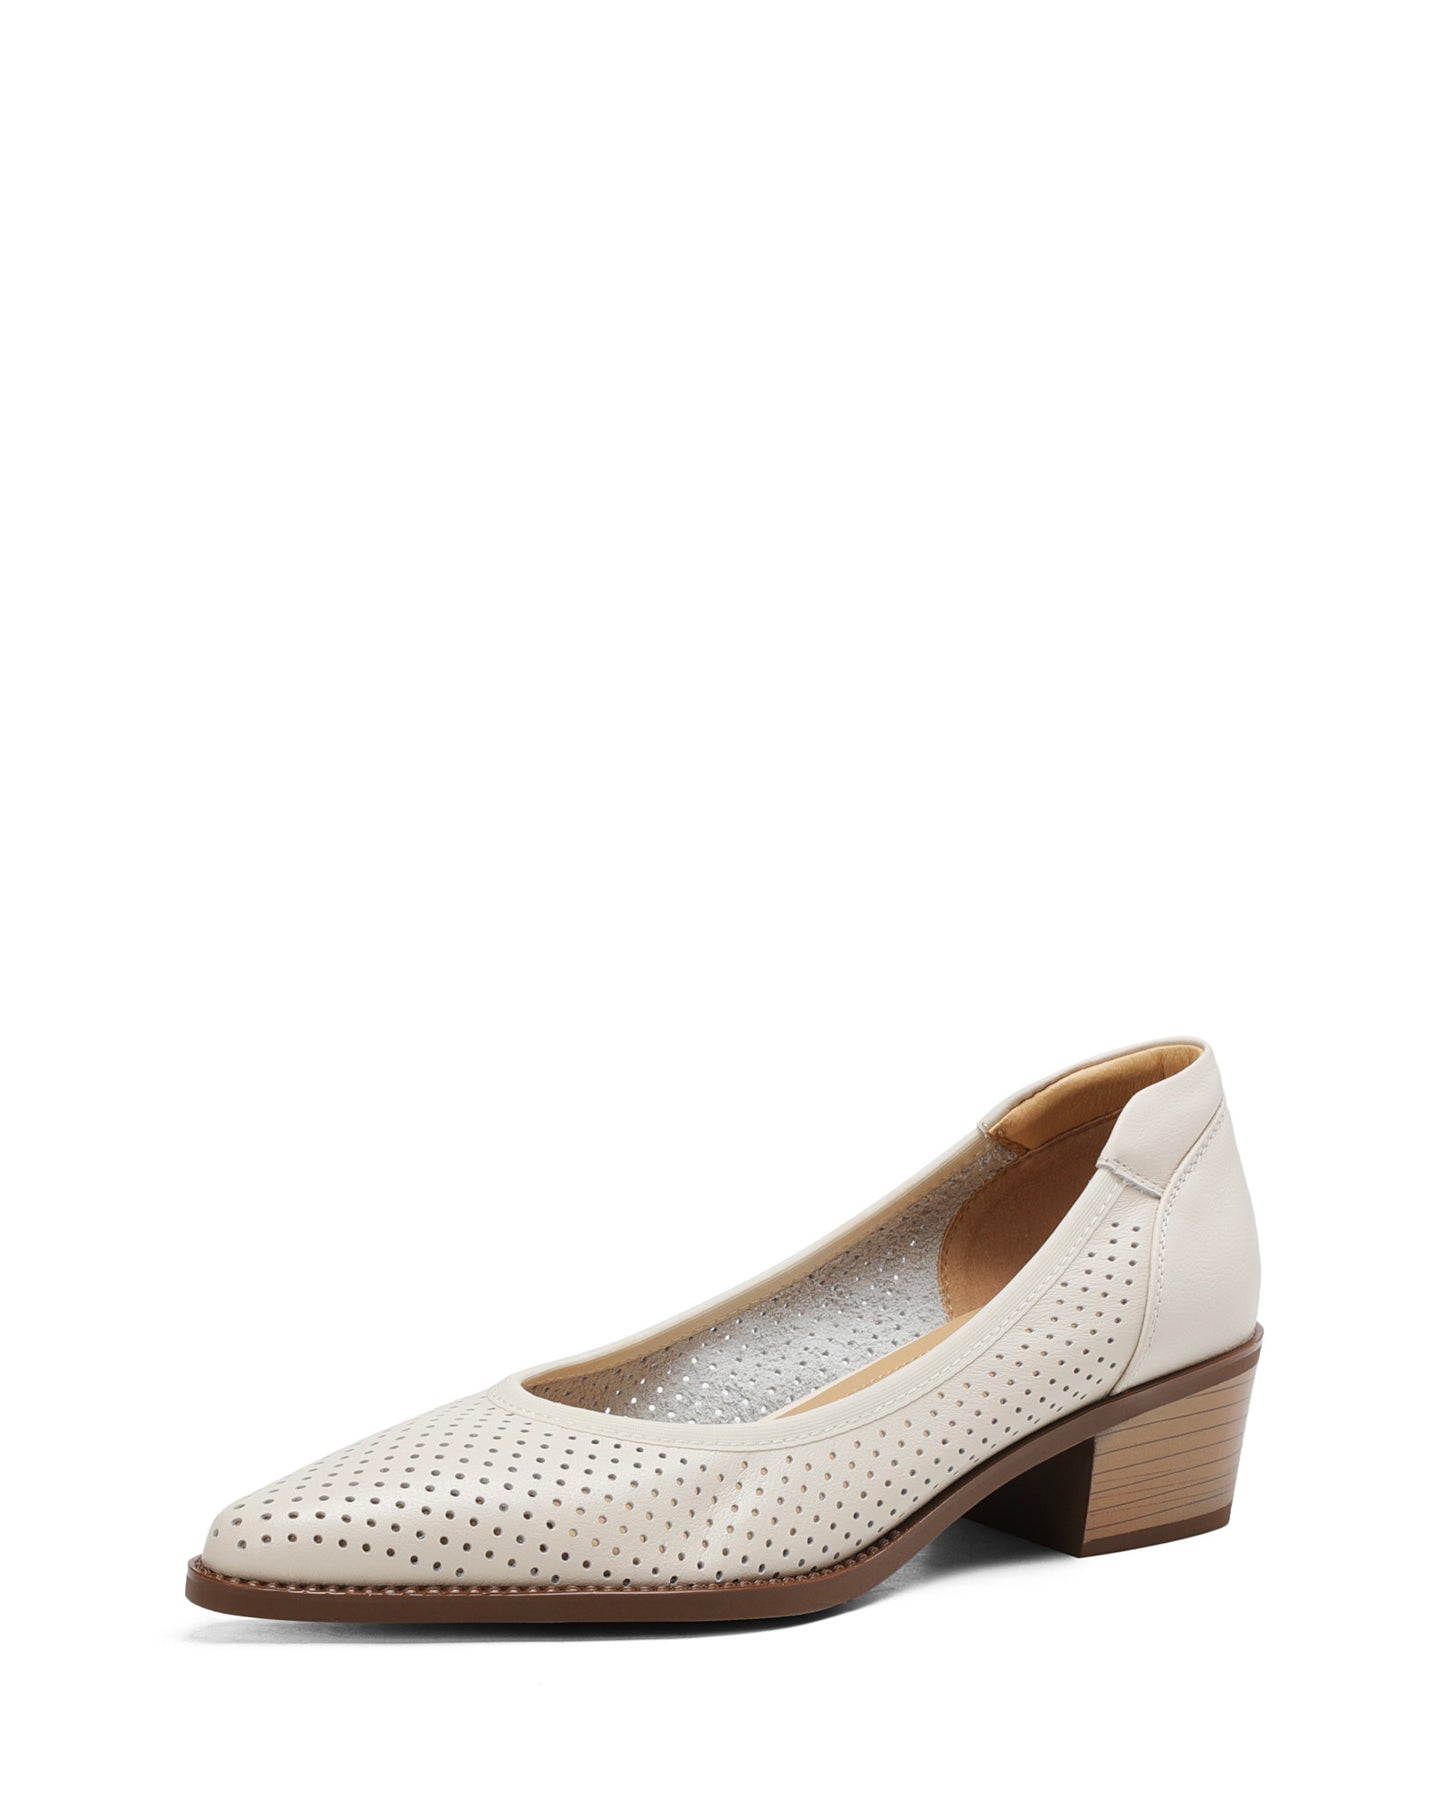 Kina - Perforated Leather Pumps